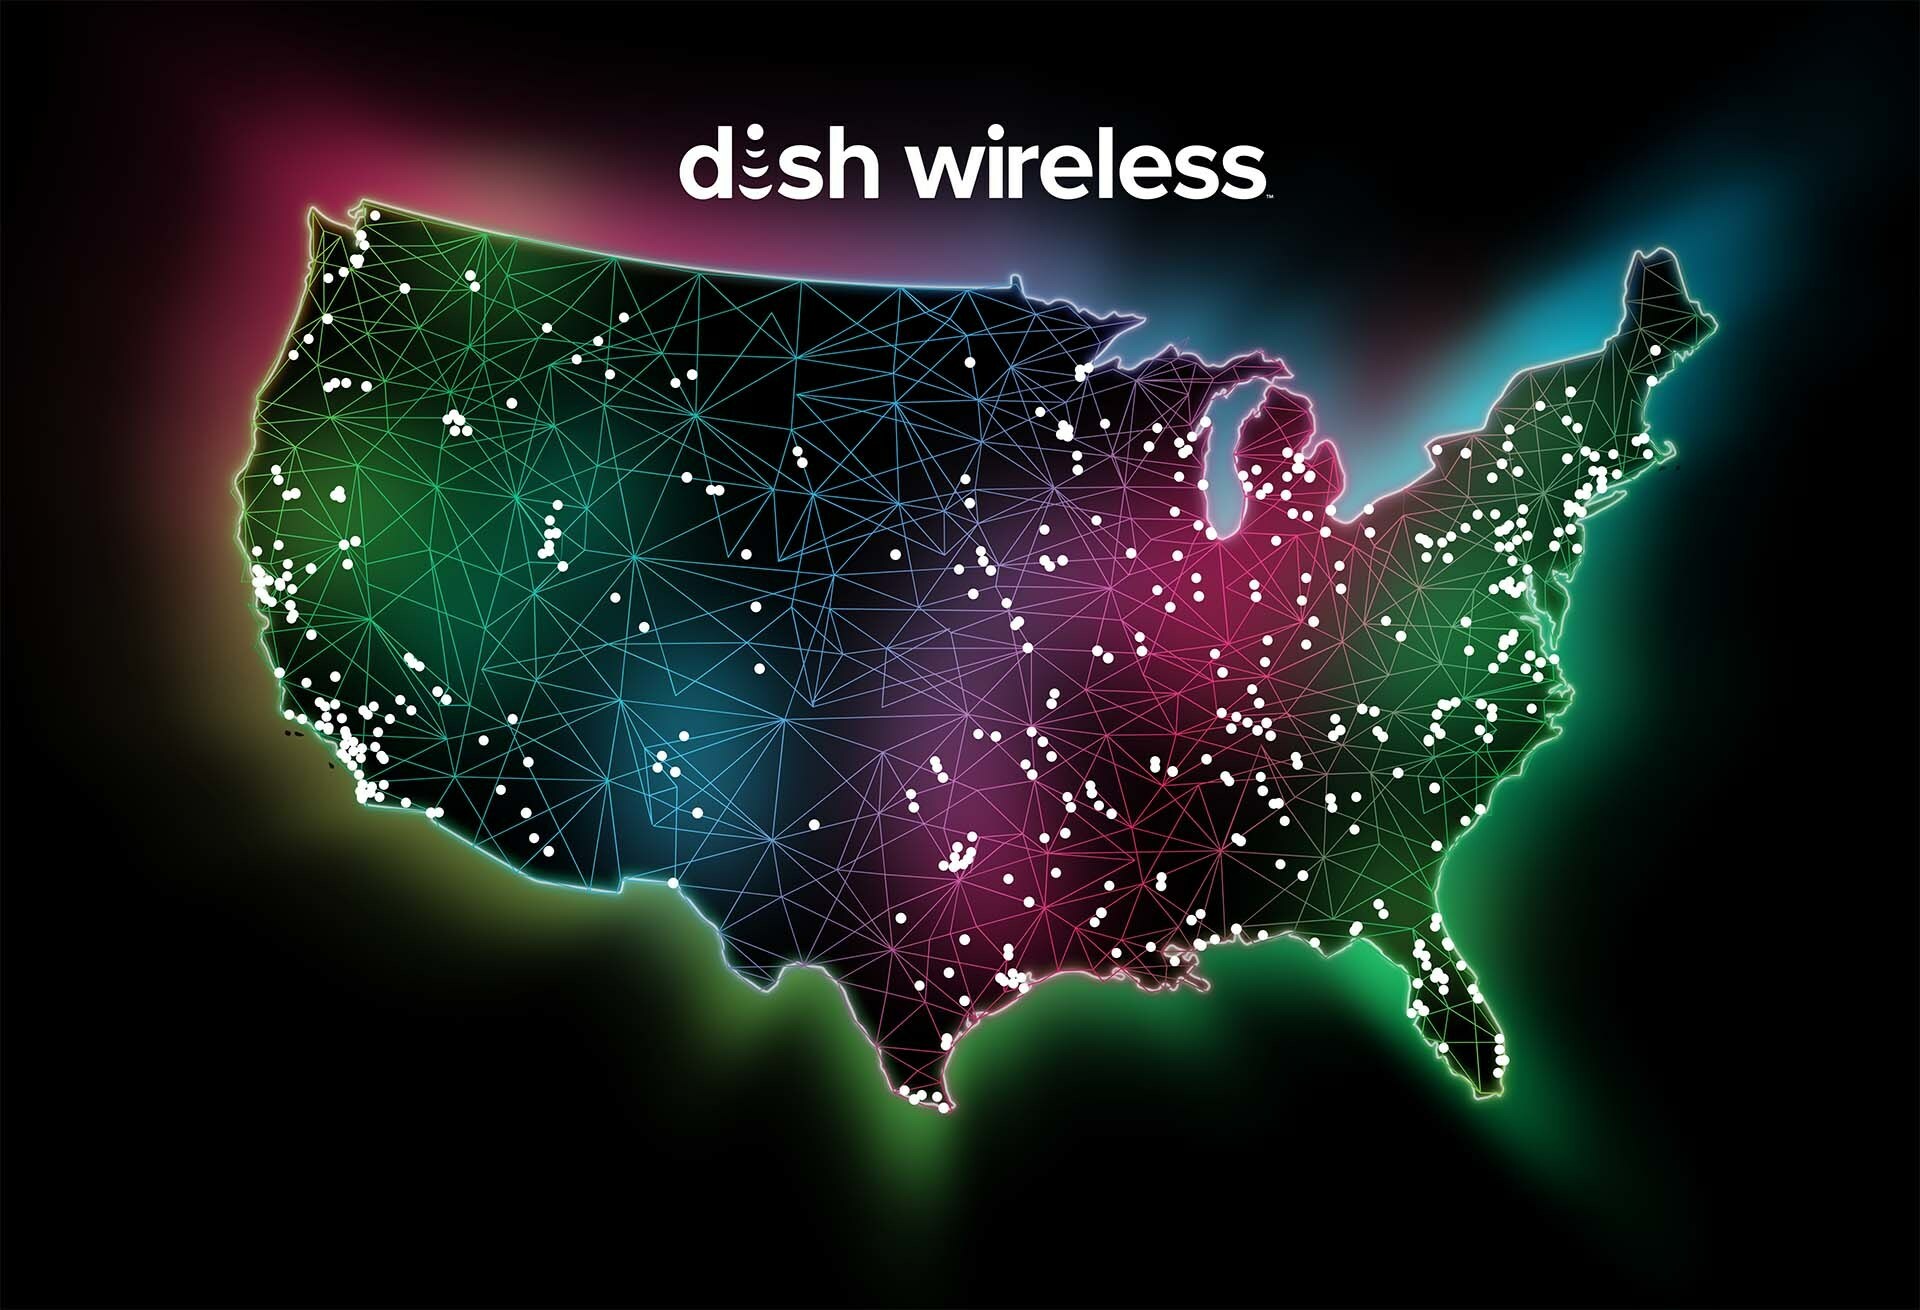 The DISH 5G Network is Now Available to Over 70 Percent of the